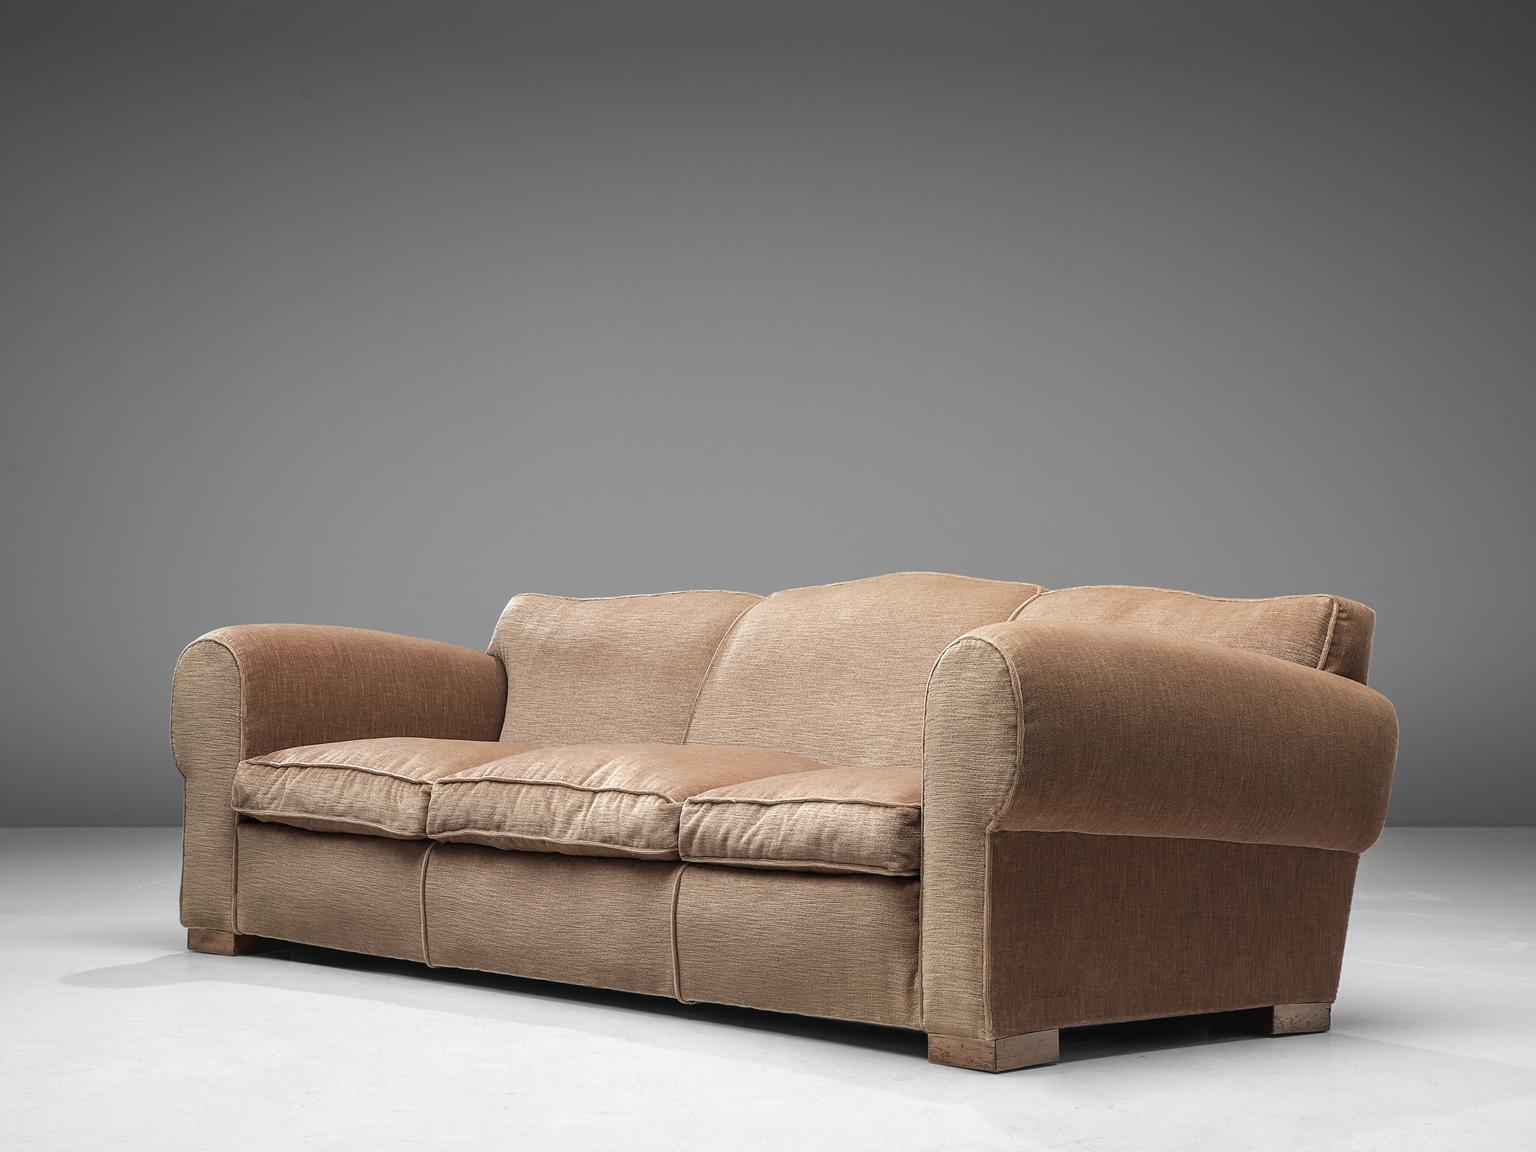 Maurice Rinck, sofa, velvet and oak, France, 1940s

Grand and comfortable three-seat sofa in taupe velvet upholstery. Truly extraordinary luxurious sofa that features a deep seat and large rounded, curved armrests. The backrest is noteworthy,